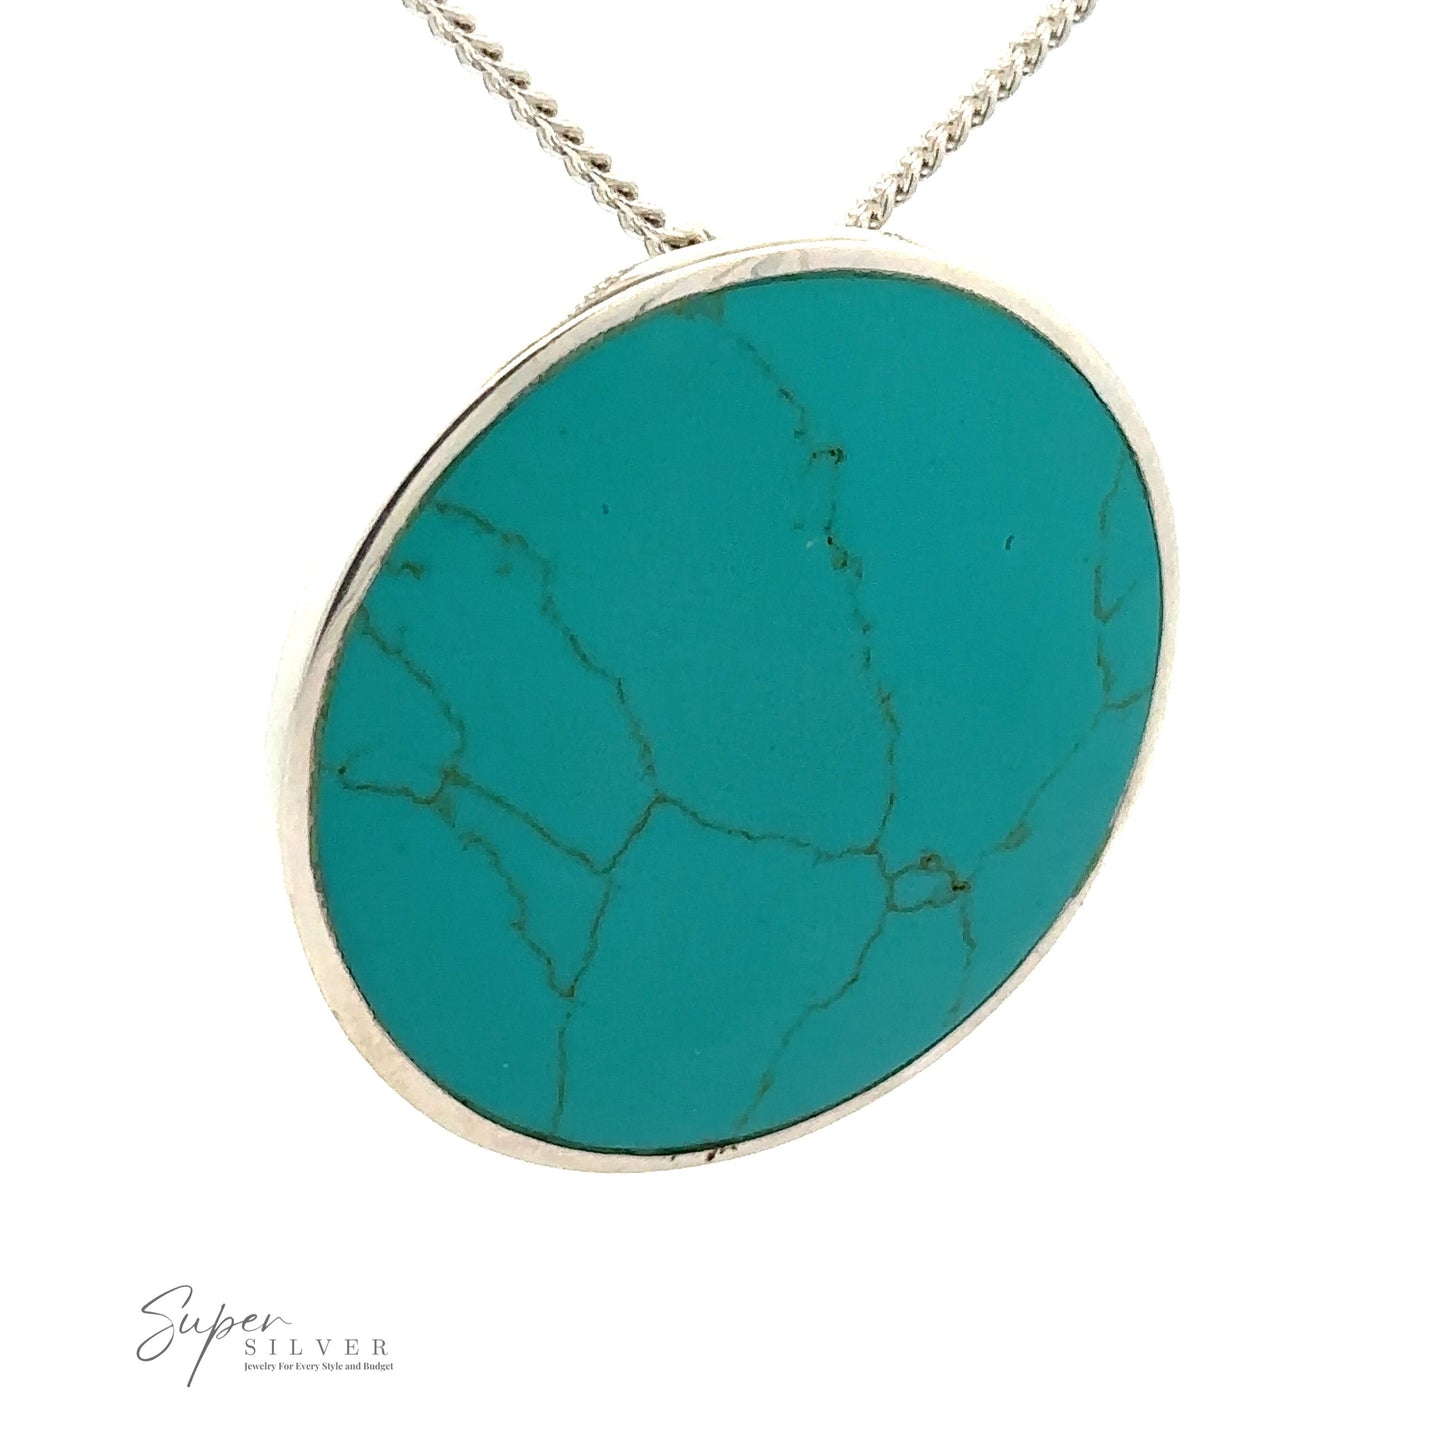 
                  
                    A Large Round Turquoise Pendant with visible veining set in a sterling silver bezel, hanging from a silver chain. This piece of minimalist jewelry also displays a partial logo with the text "Super Silver" in the lower left corner.
                  
                